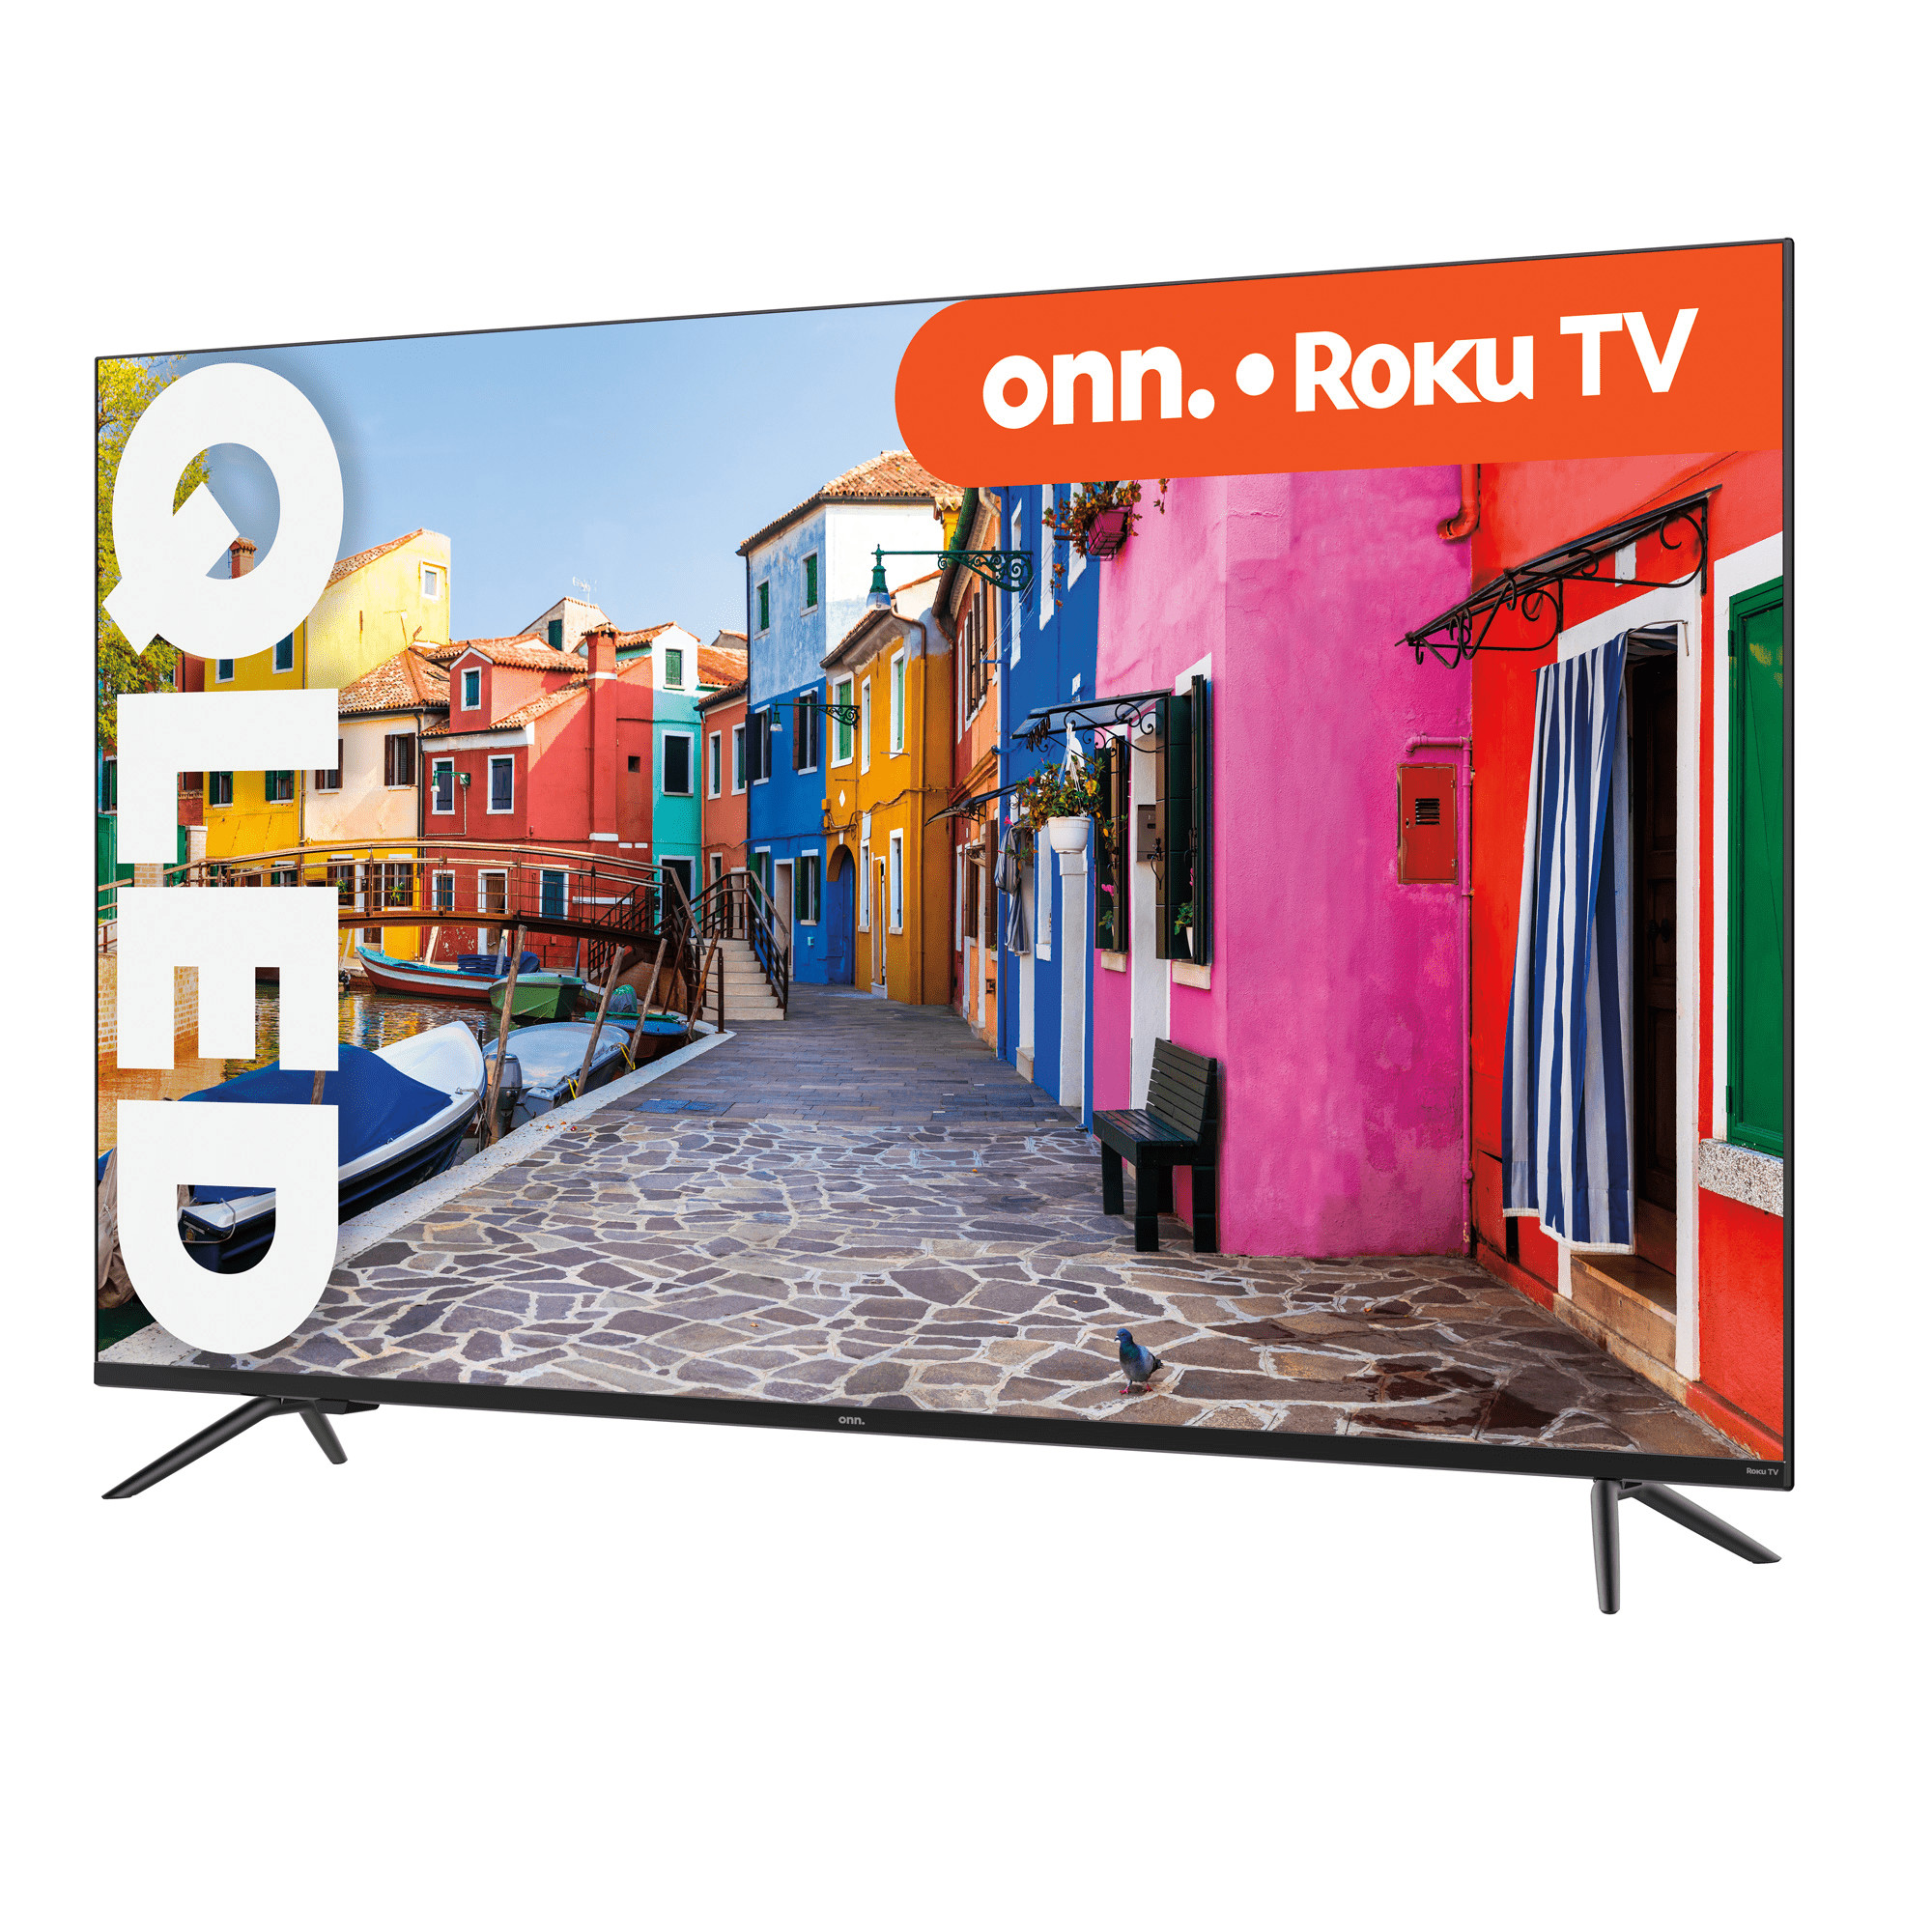 onn. 55” QLED 4K UHD (2160p) Roku Smart TV with Dolby Atmos, Dolby Vision, Local Dimming, 120hz Effective Refresh Rate, and HDR (100071701) - image 3 of 17